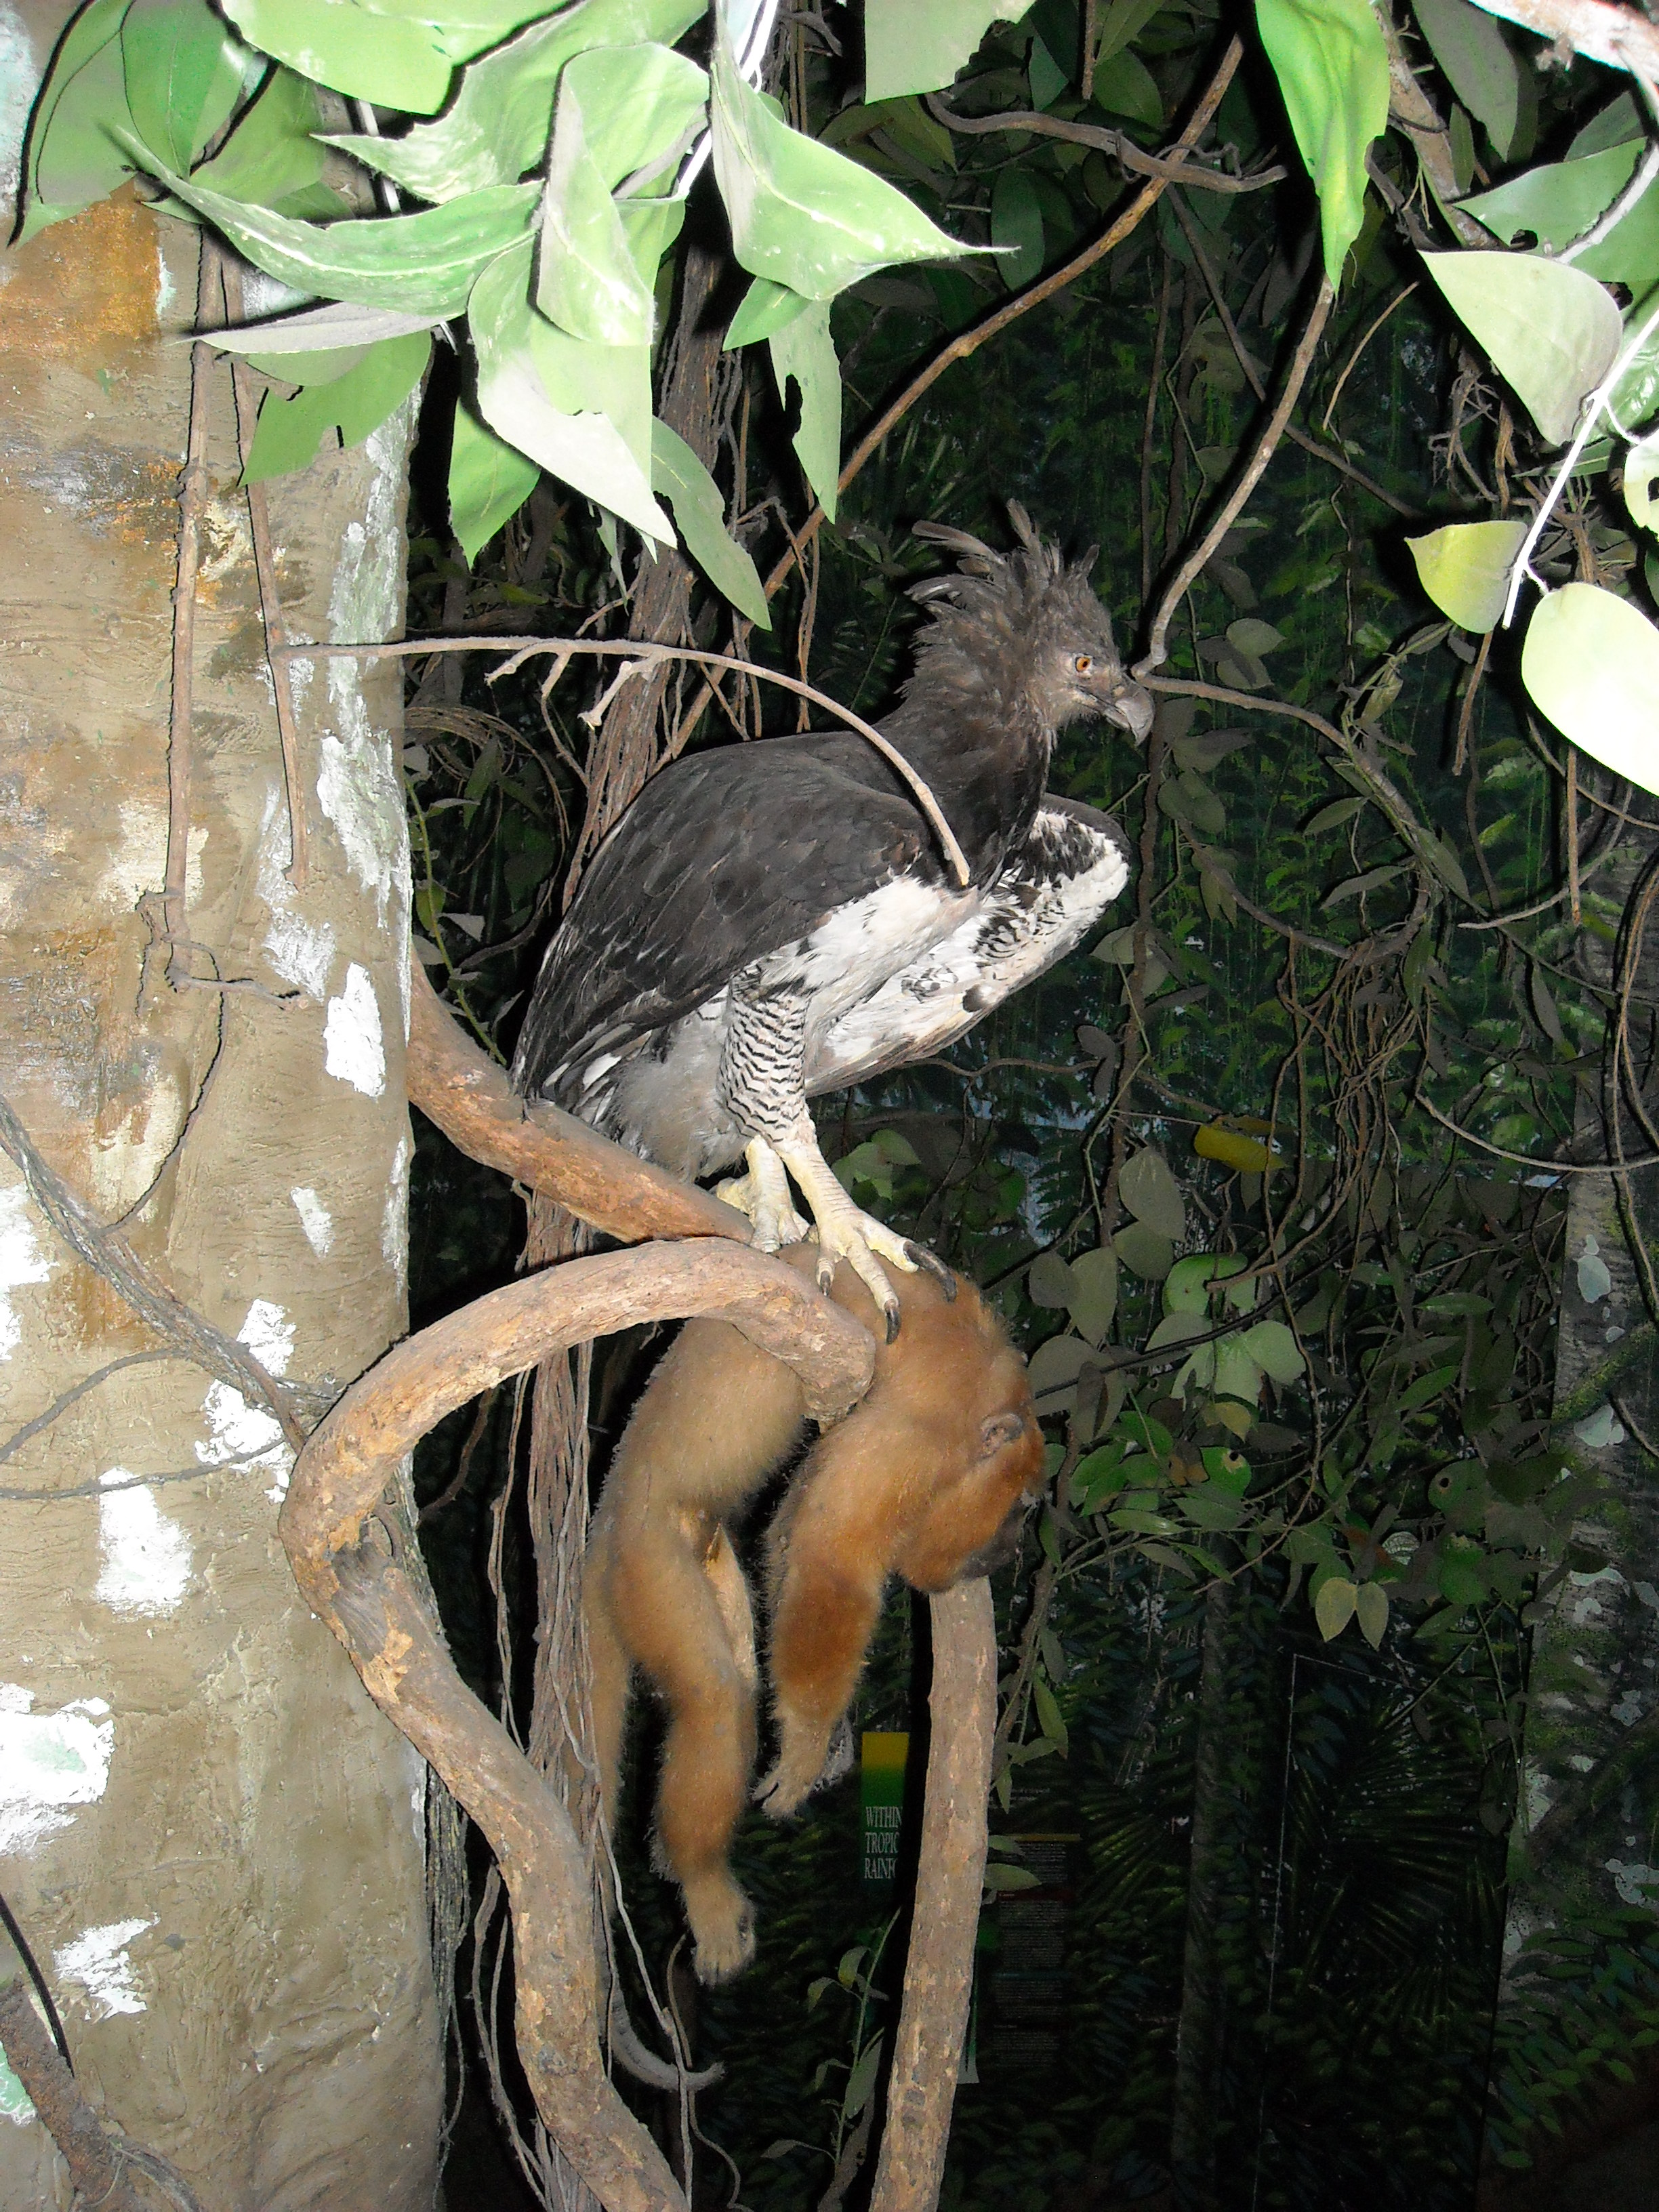 Harpy Eagle with Howler Monkey. Photo taken by Kirsten, published on Flickr